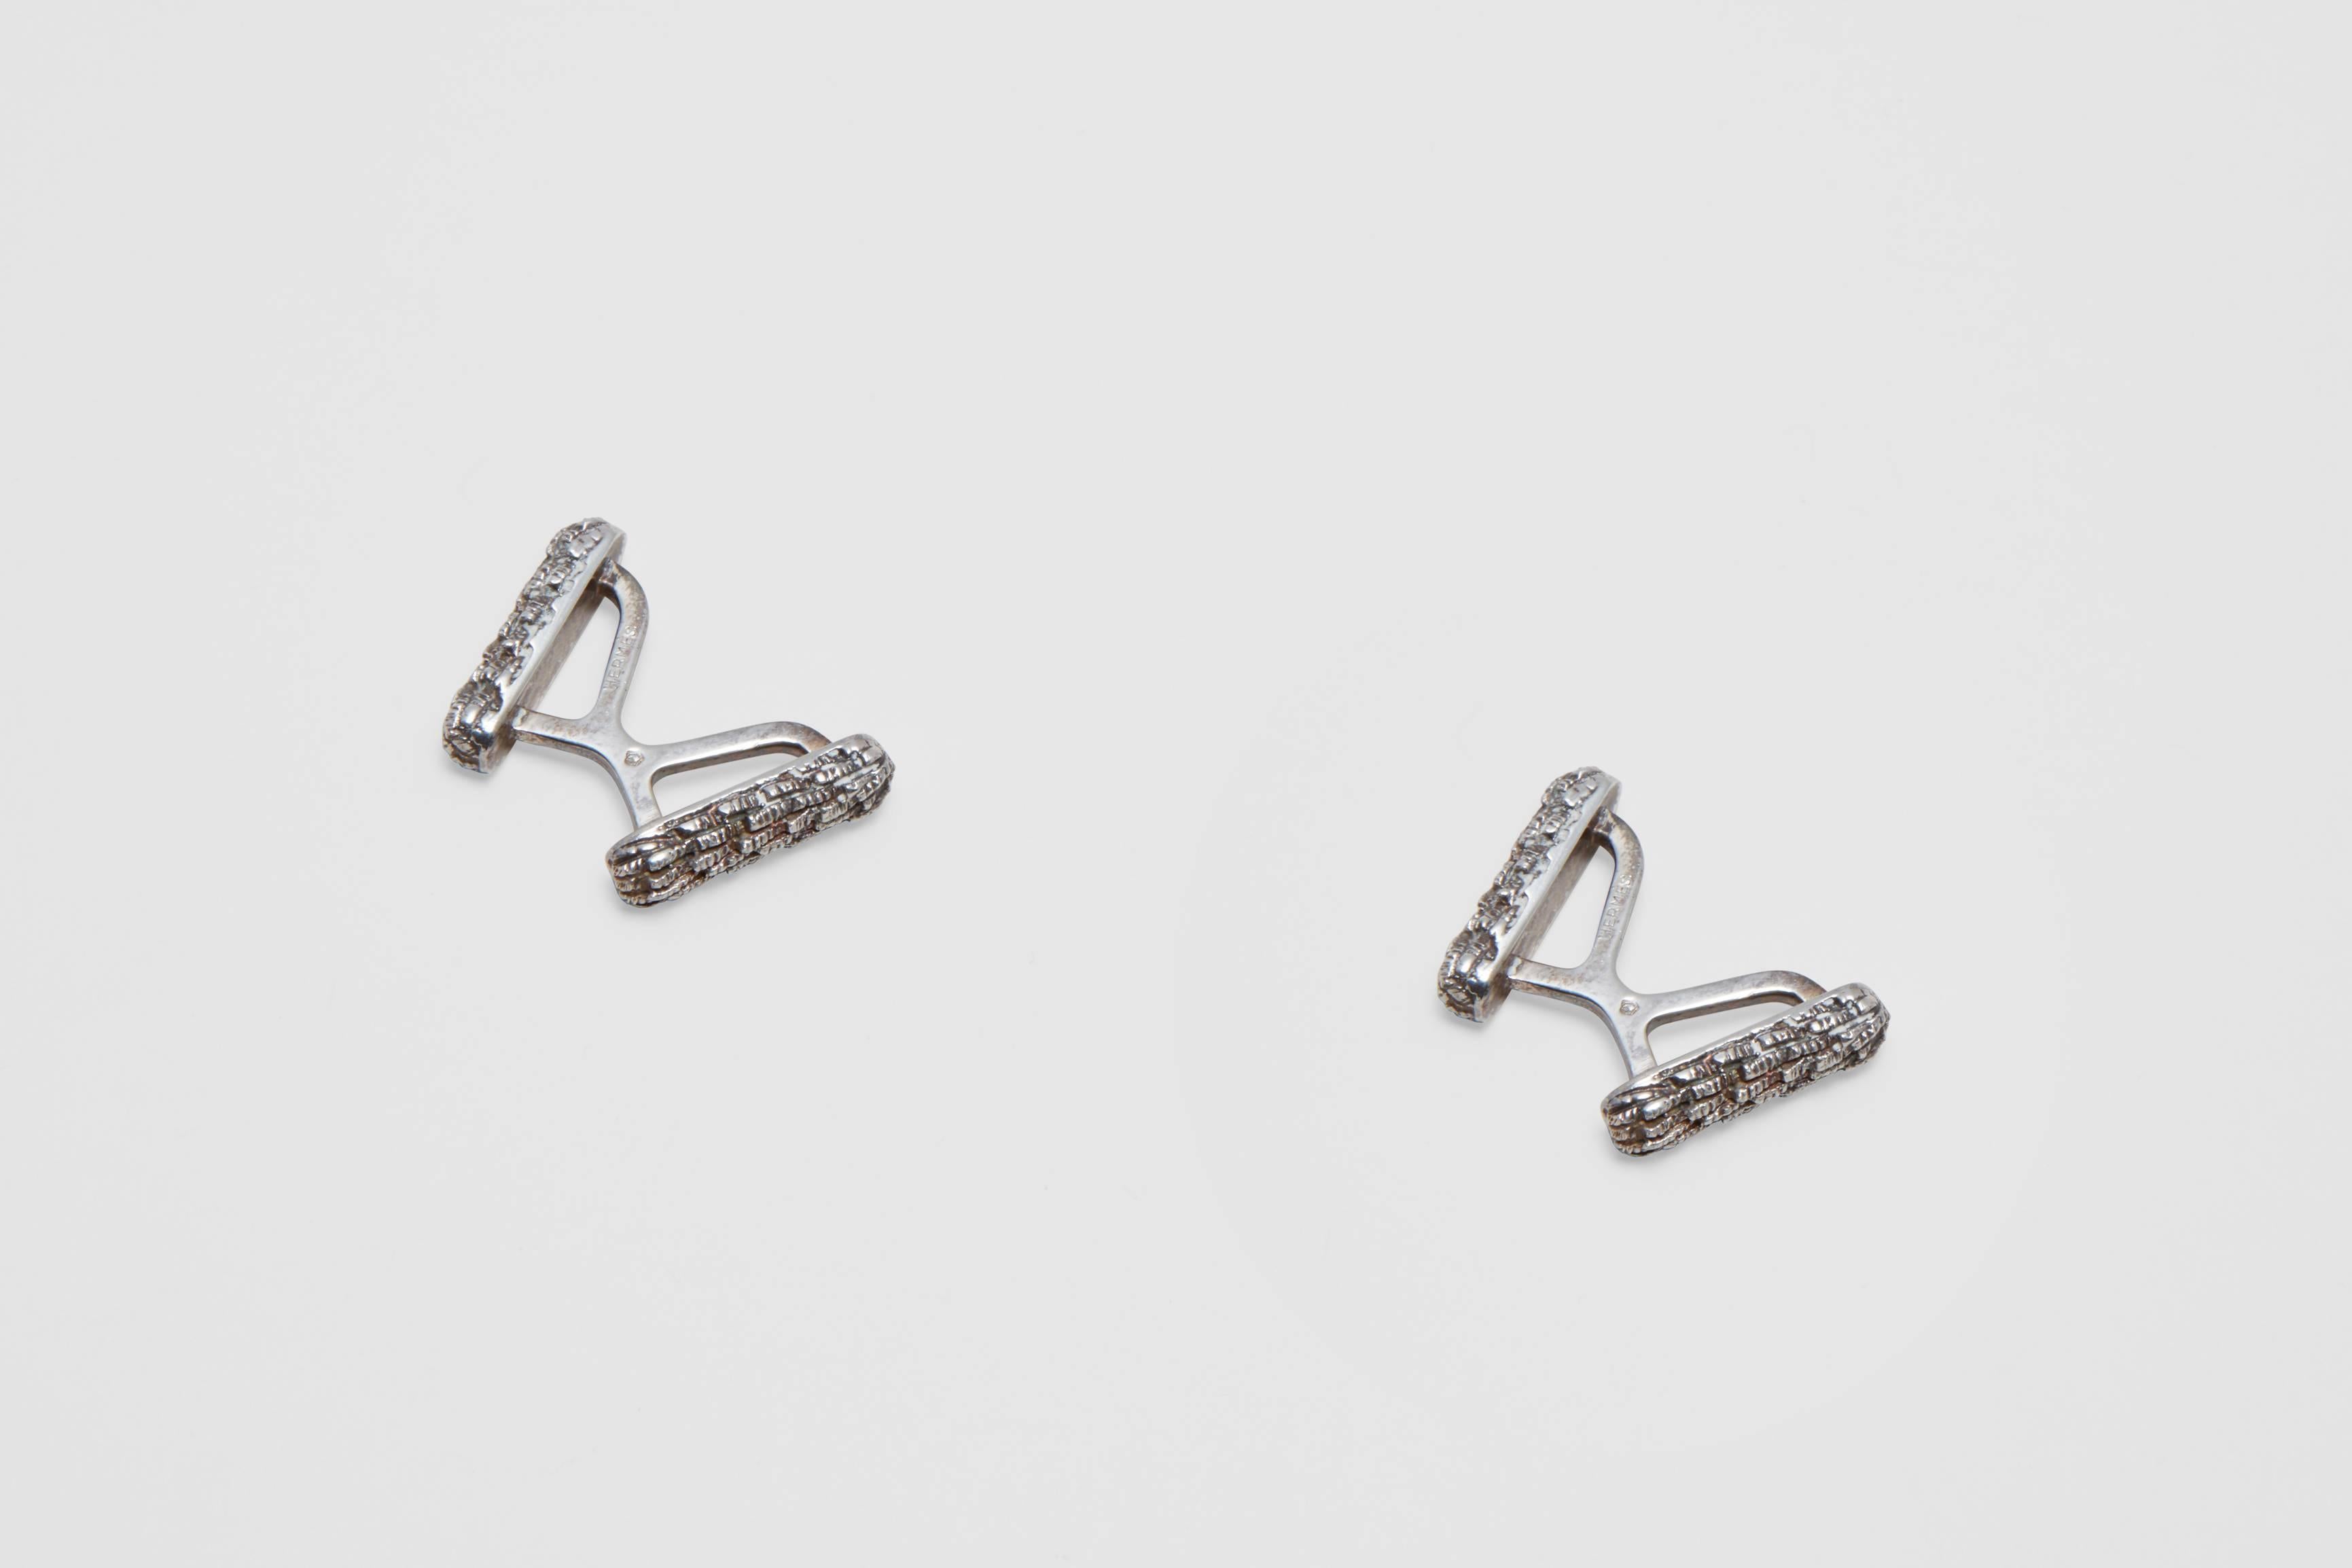 A pair of sterling silver cufflinks made in a very Brutalist design. This exceptionally rare form of cufflink was made by the luxury retailer; Hermès. This design is something that was very unusual to come from a normally 'conservative', or thematic